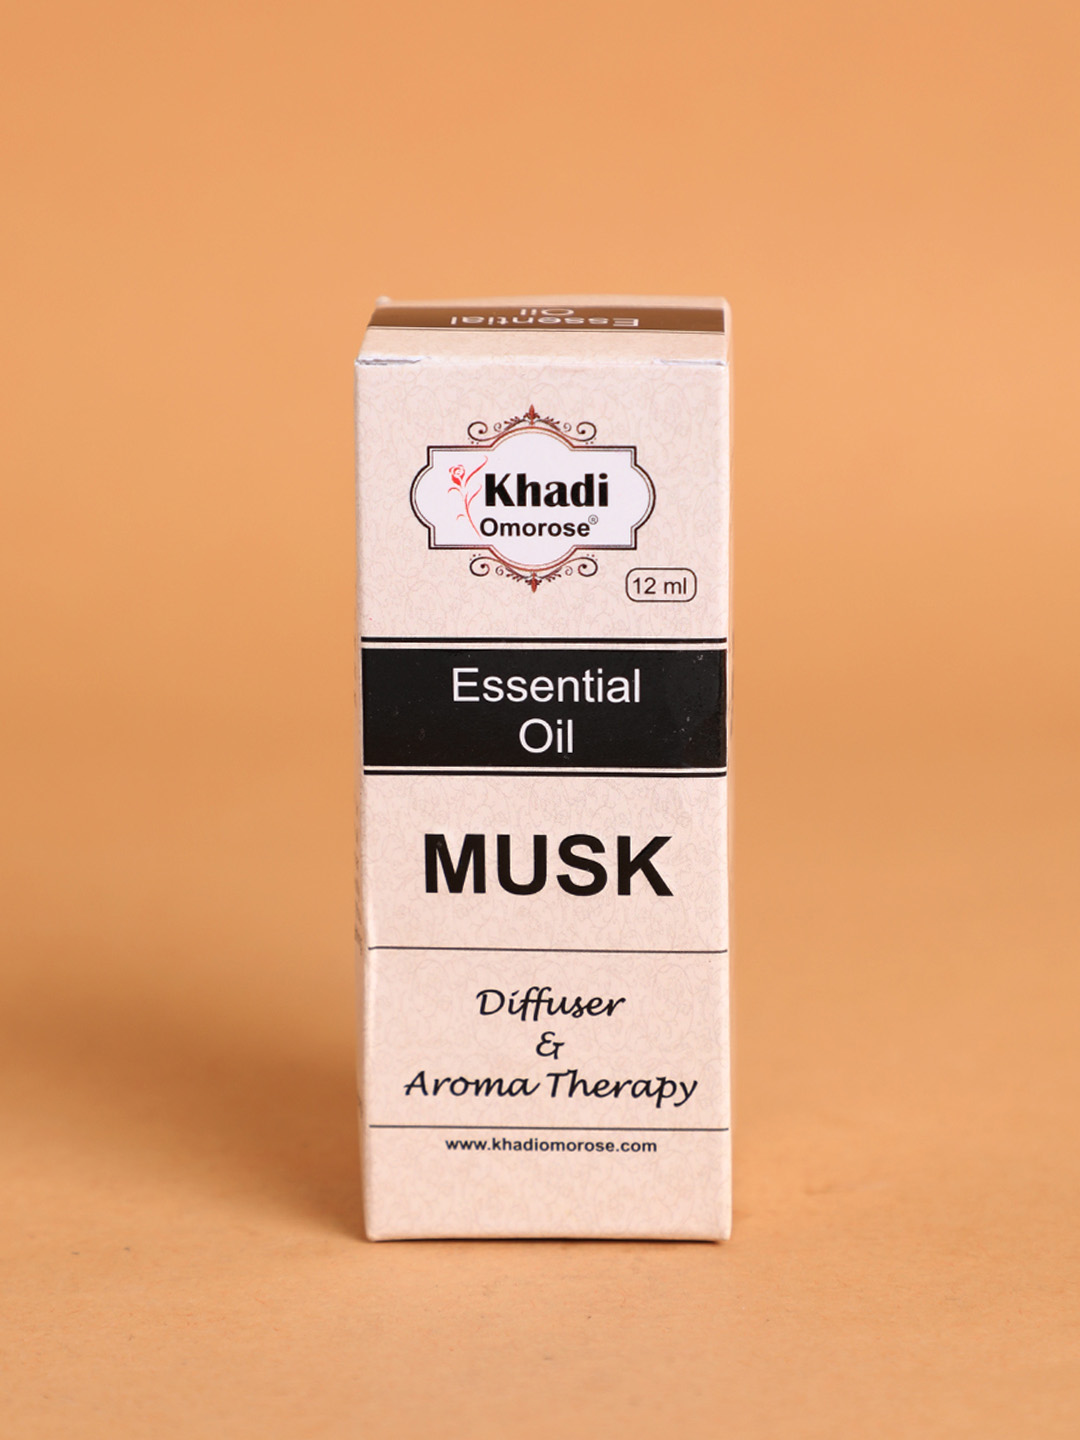 Khadi Omorose Musk Essential Oil, 12ml with free shipping